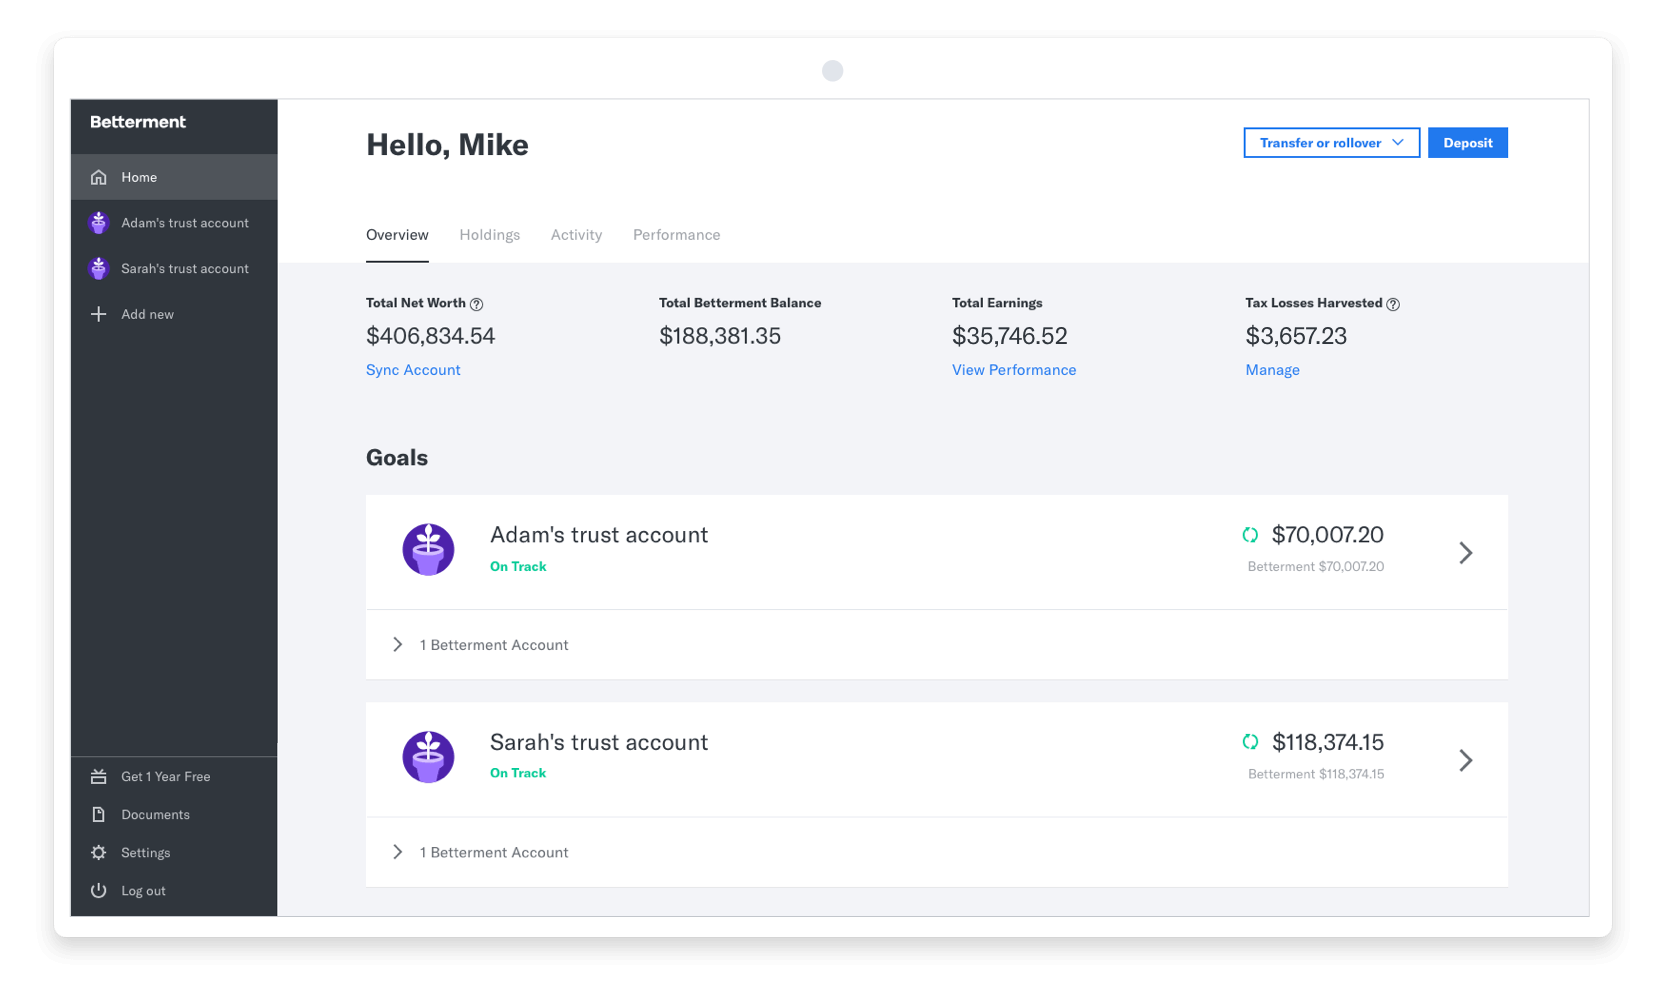 The Betterment web application showing multiple trust accounts